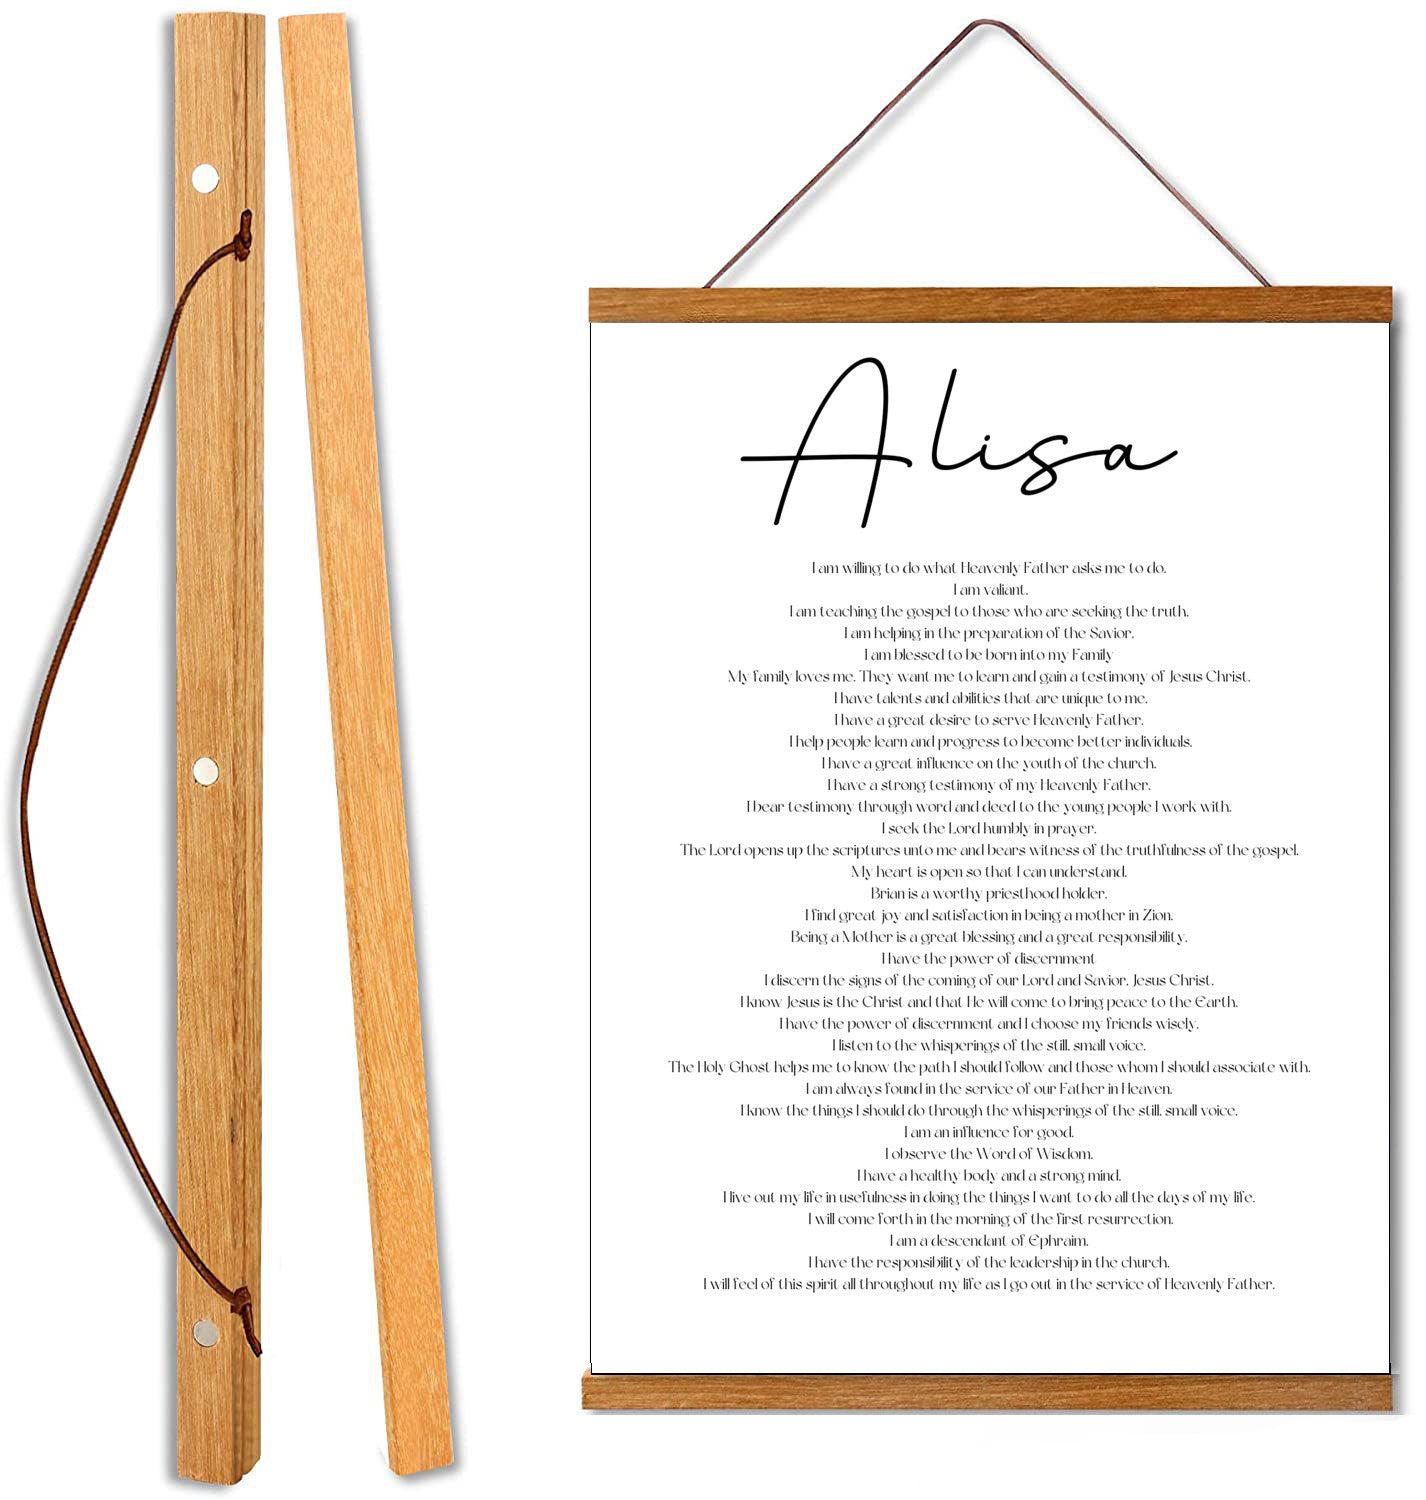 Personalized Patriarchal Blessing Affirmations on a Hanging Canvas